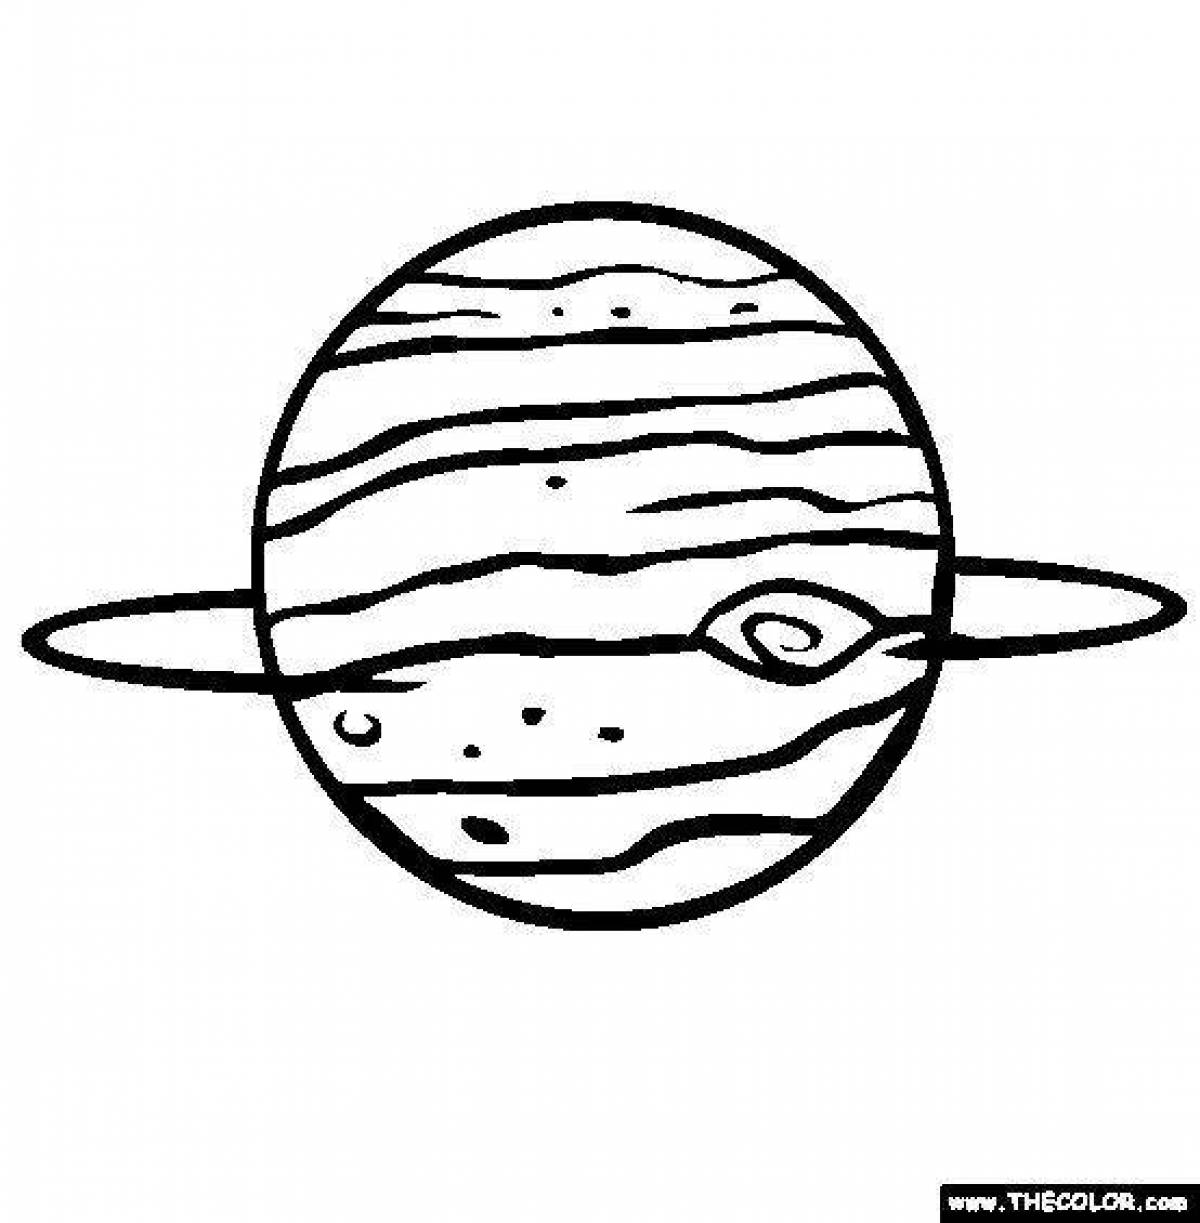 Jupiter coloring page with bright tint